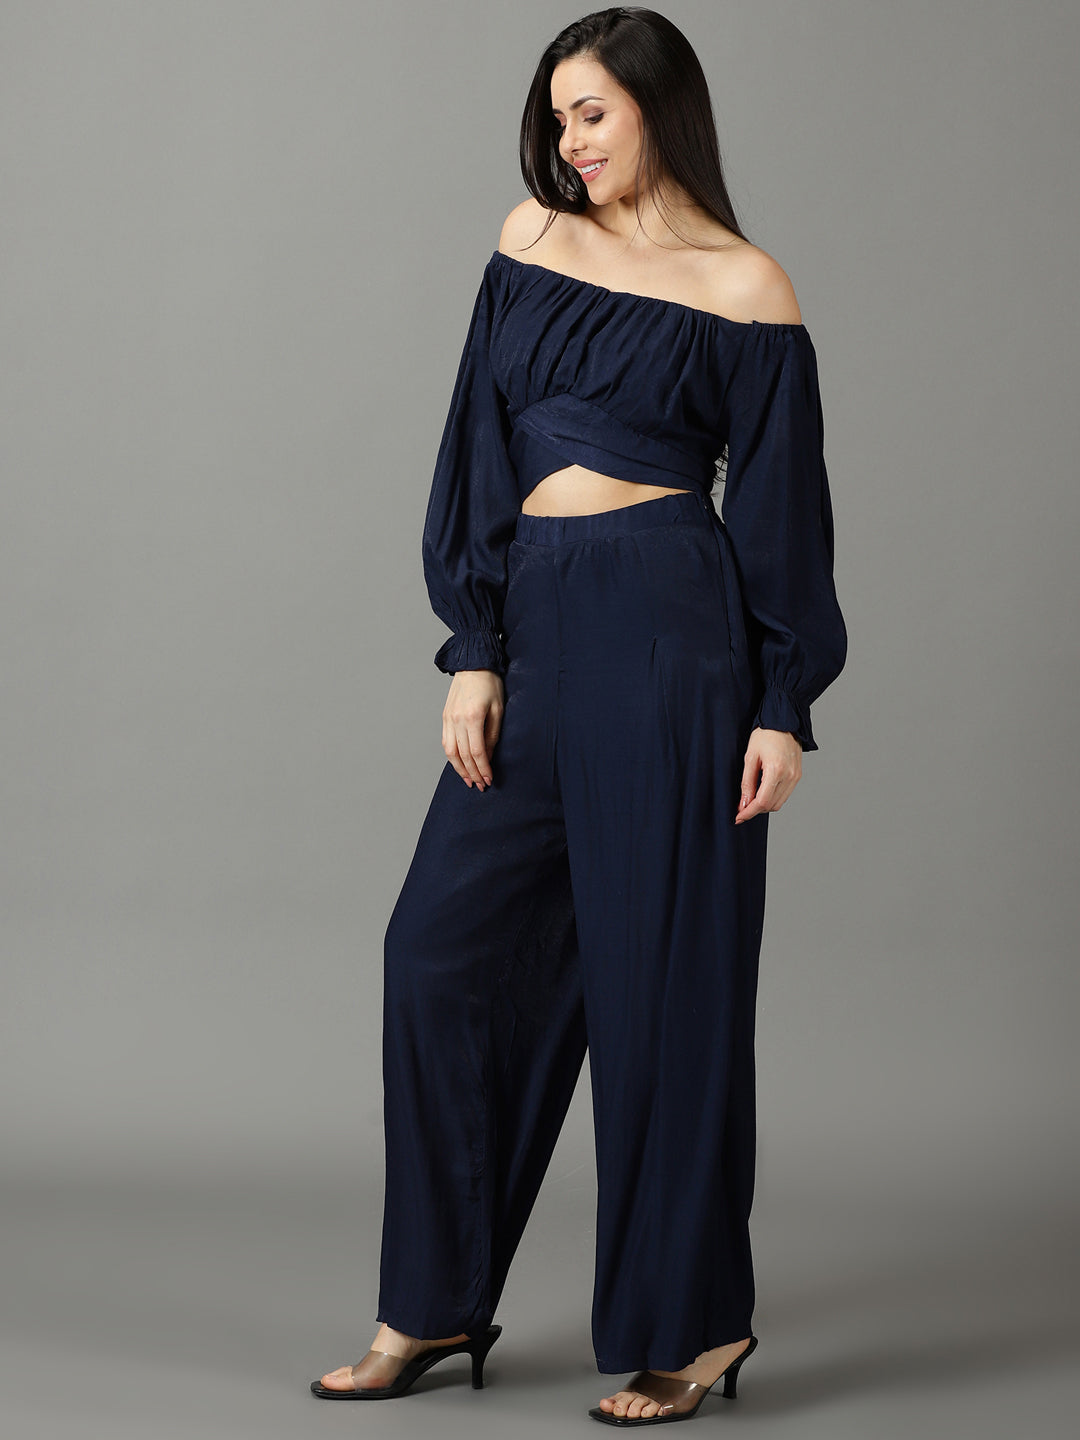 Women's Navy Blue Solid Co-Ords